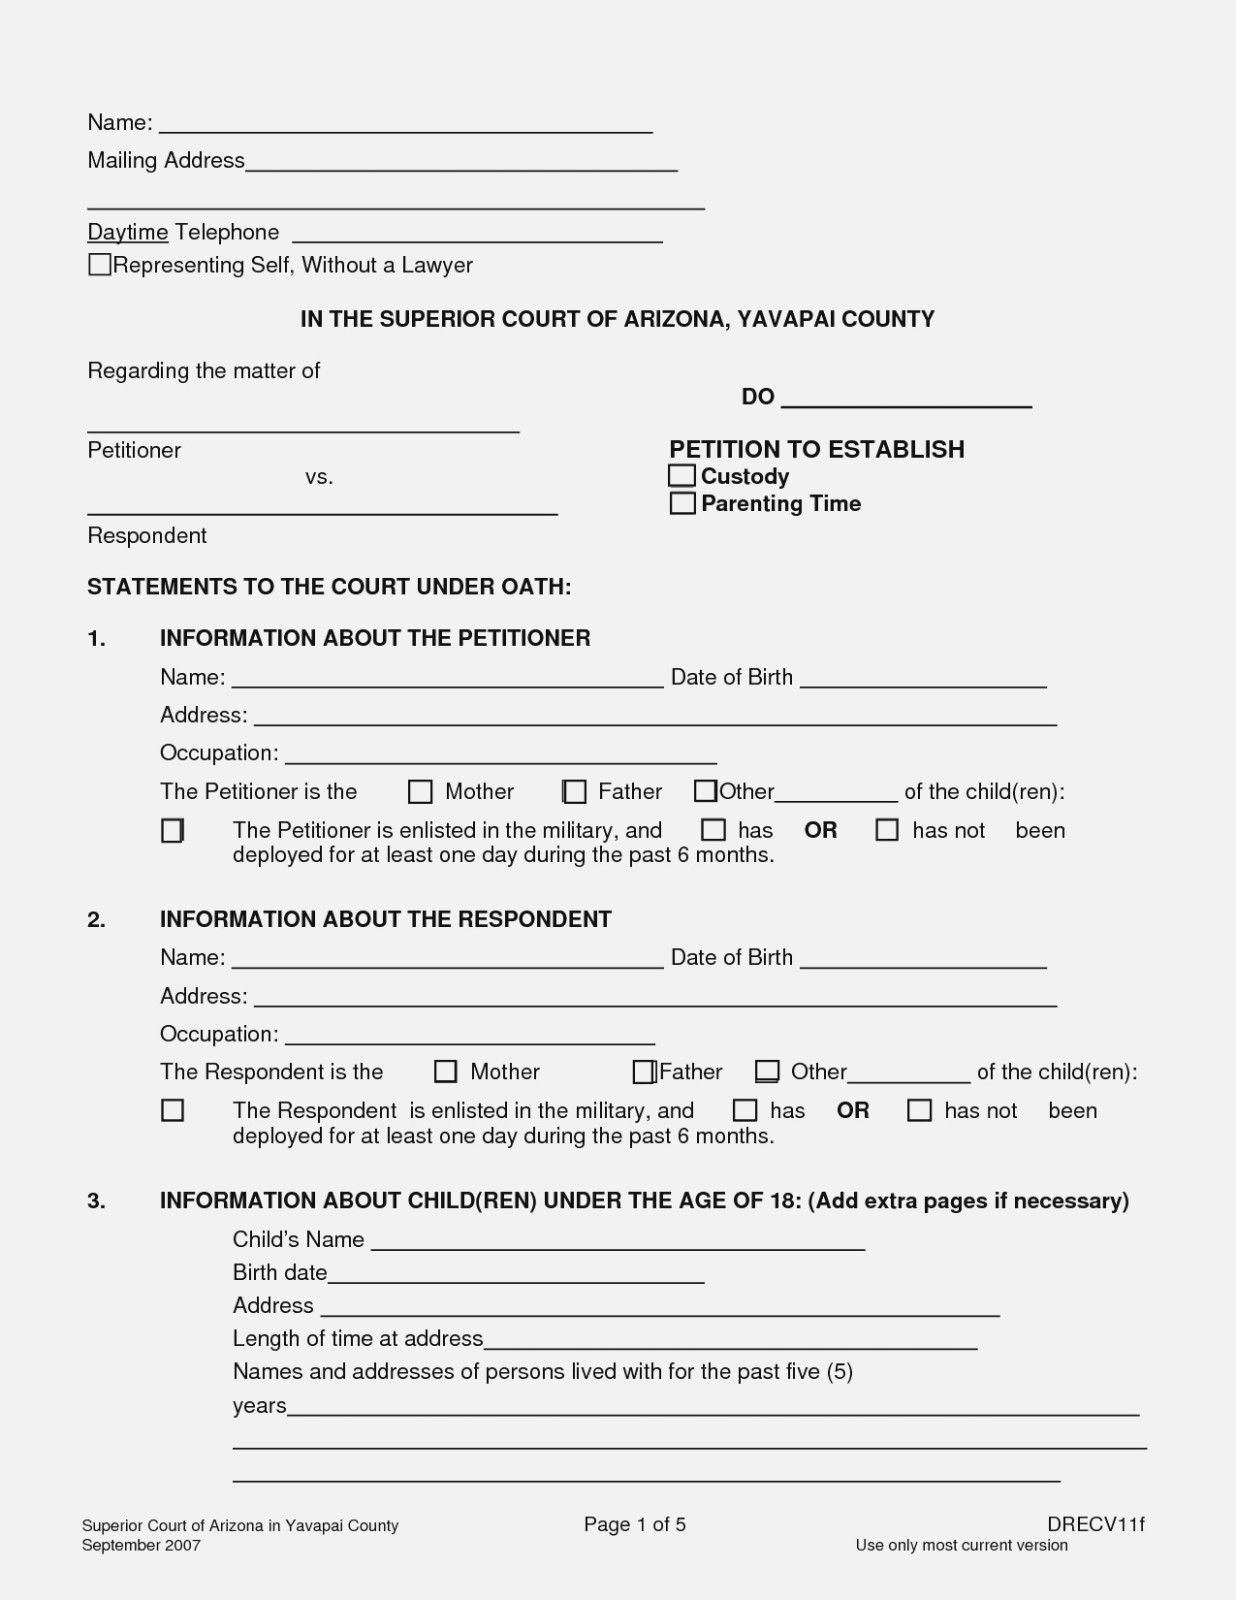 Is Free Printable | Invoice And Resume Template Ideas - Free Printable Child Guardianship Forms